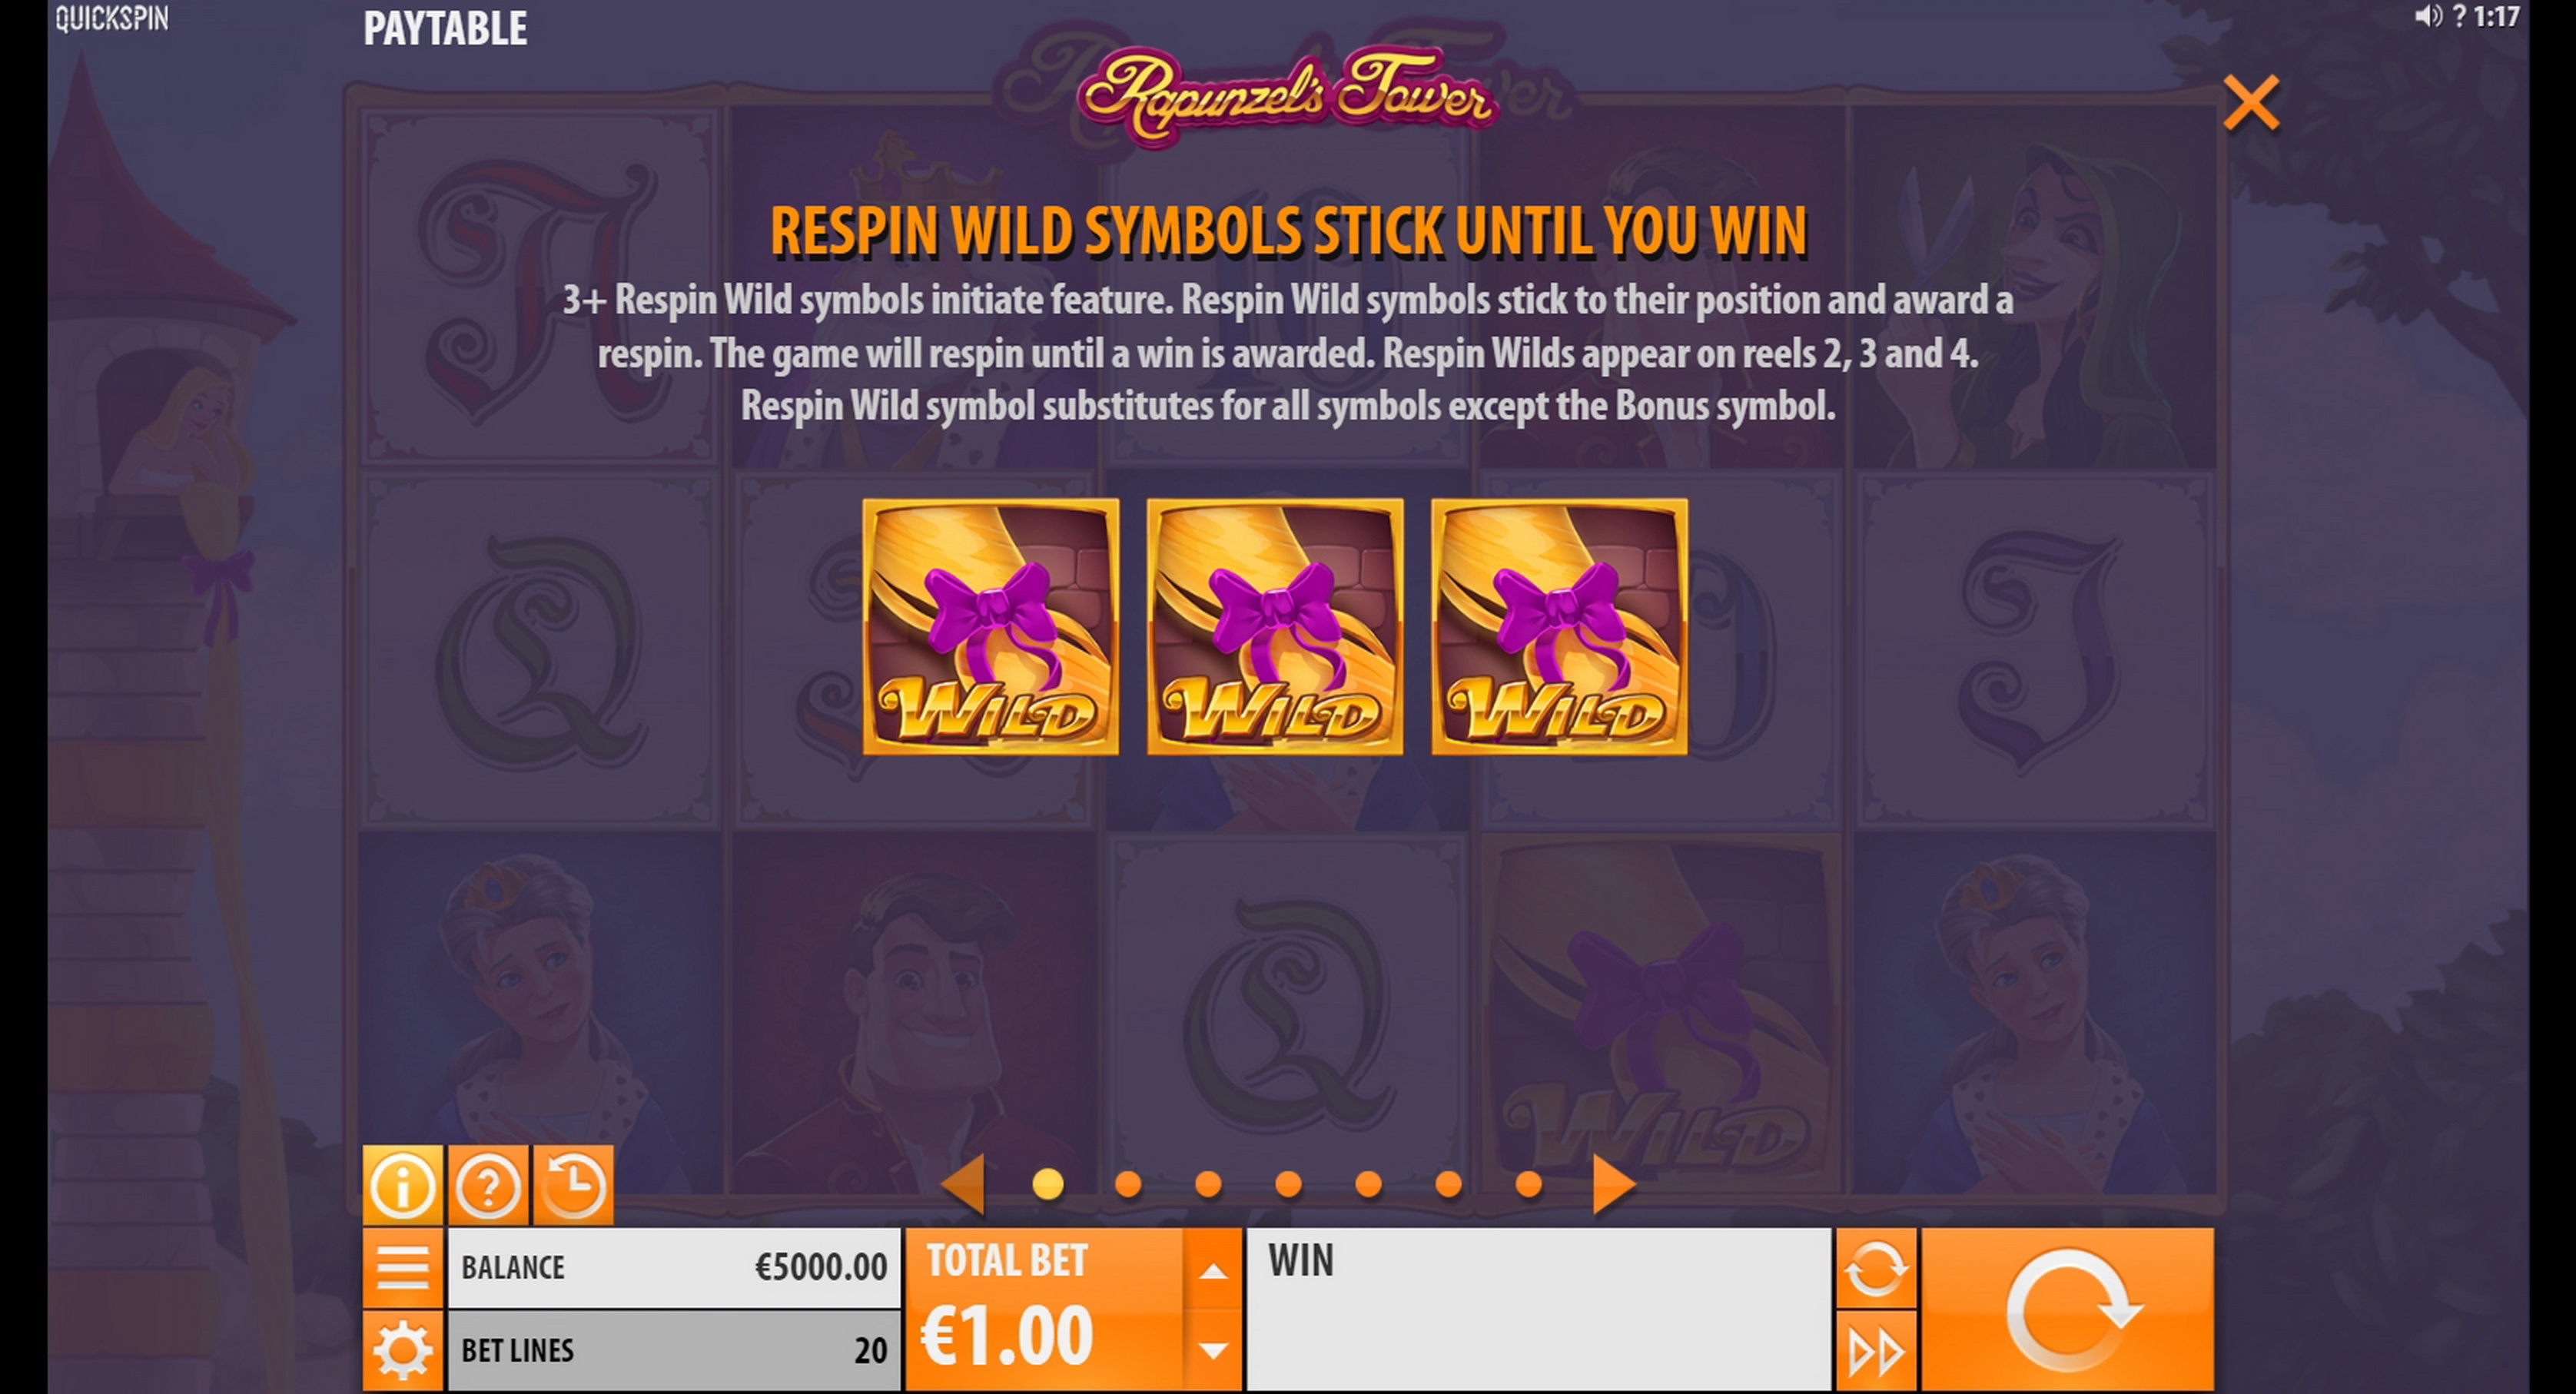 Info of Rapunzel's Tower Slot Game by Quickspin